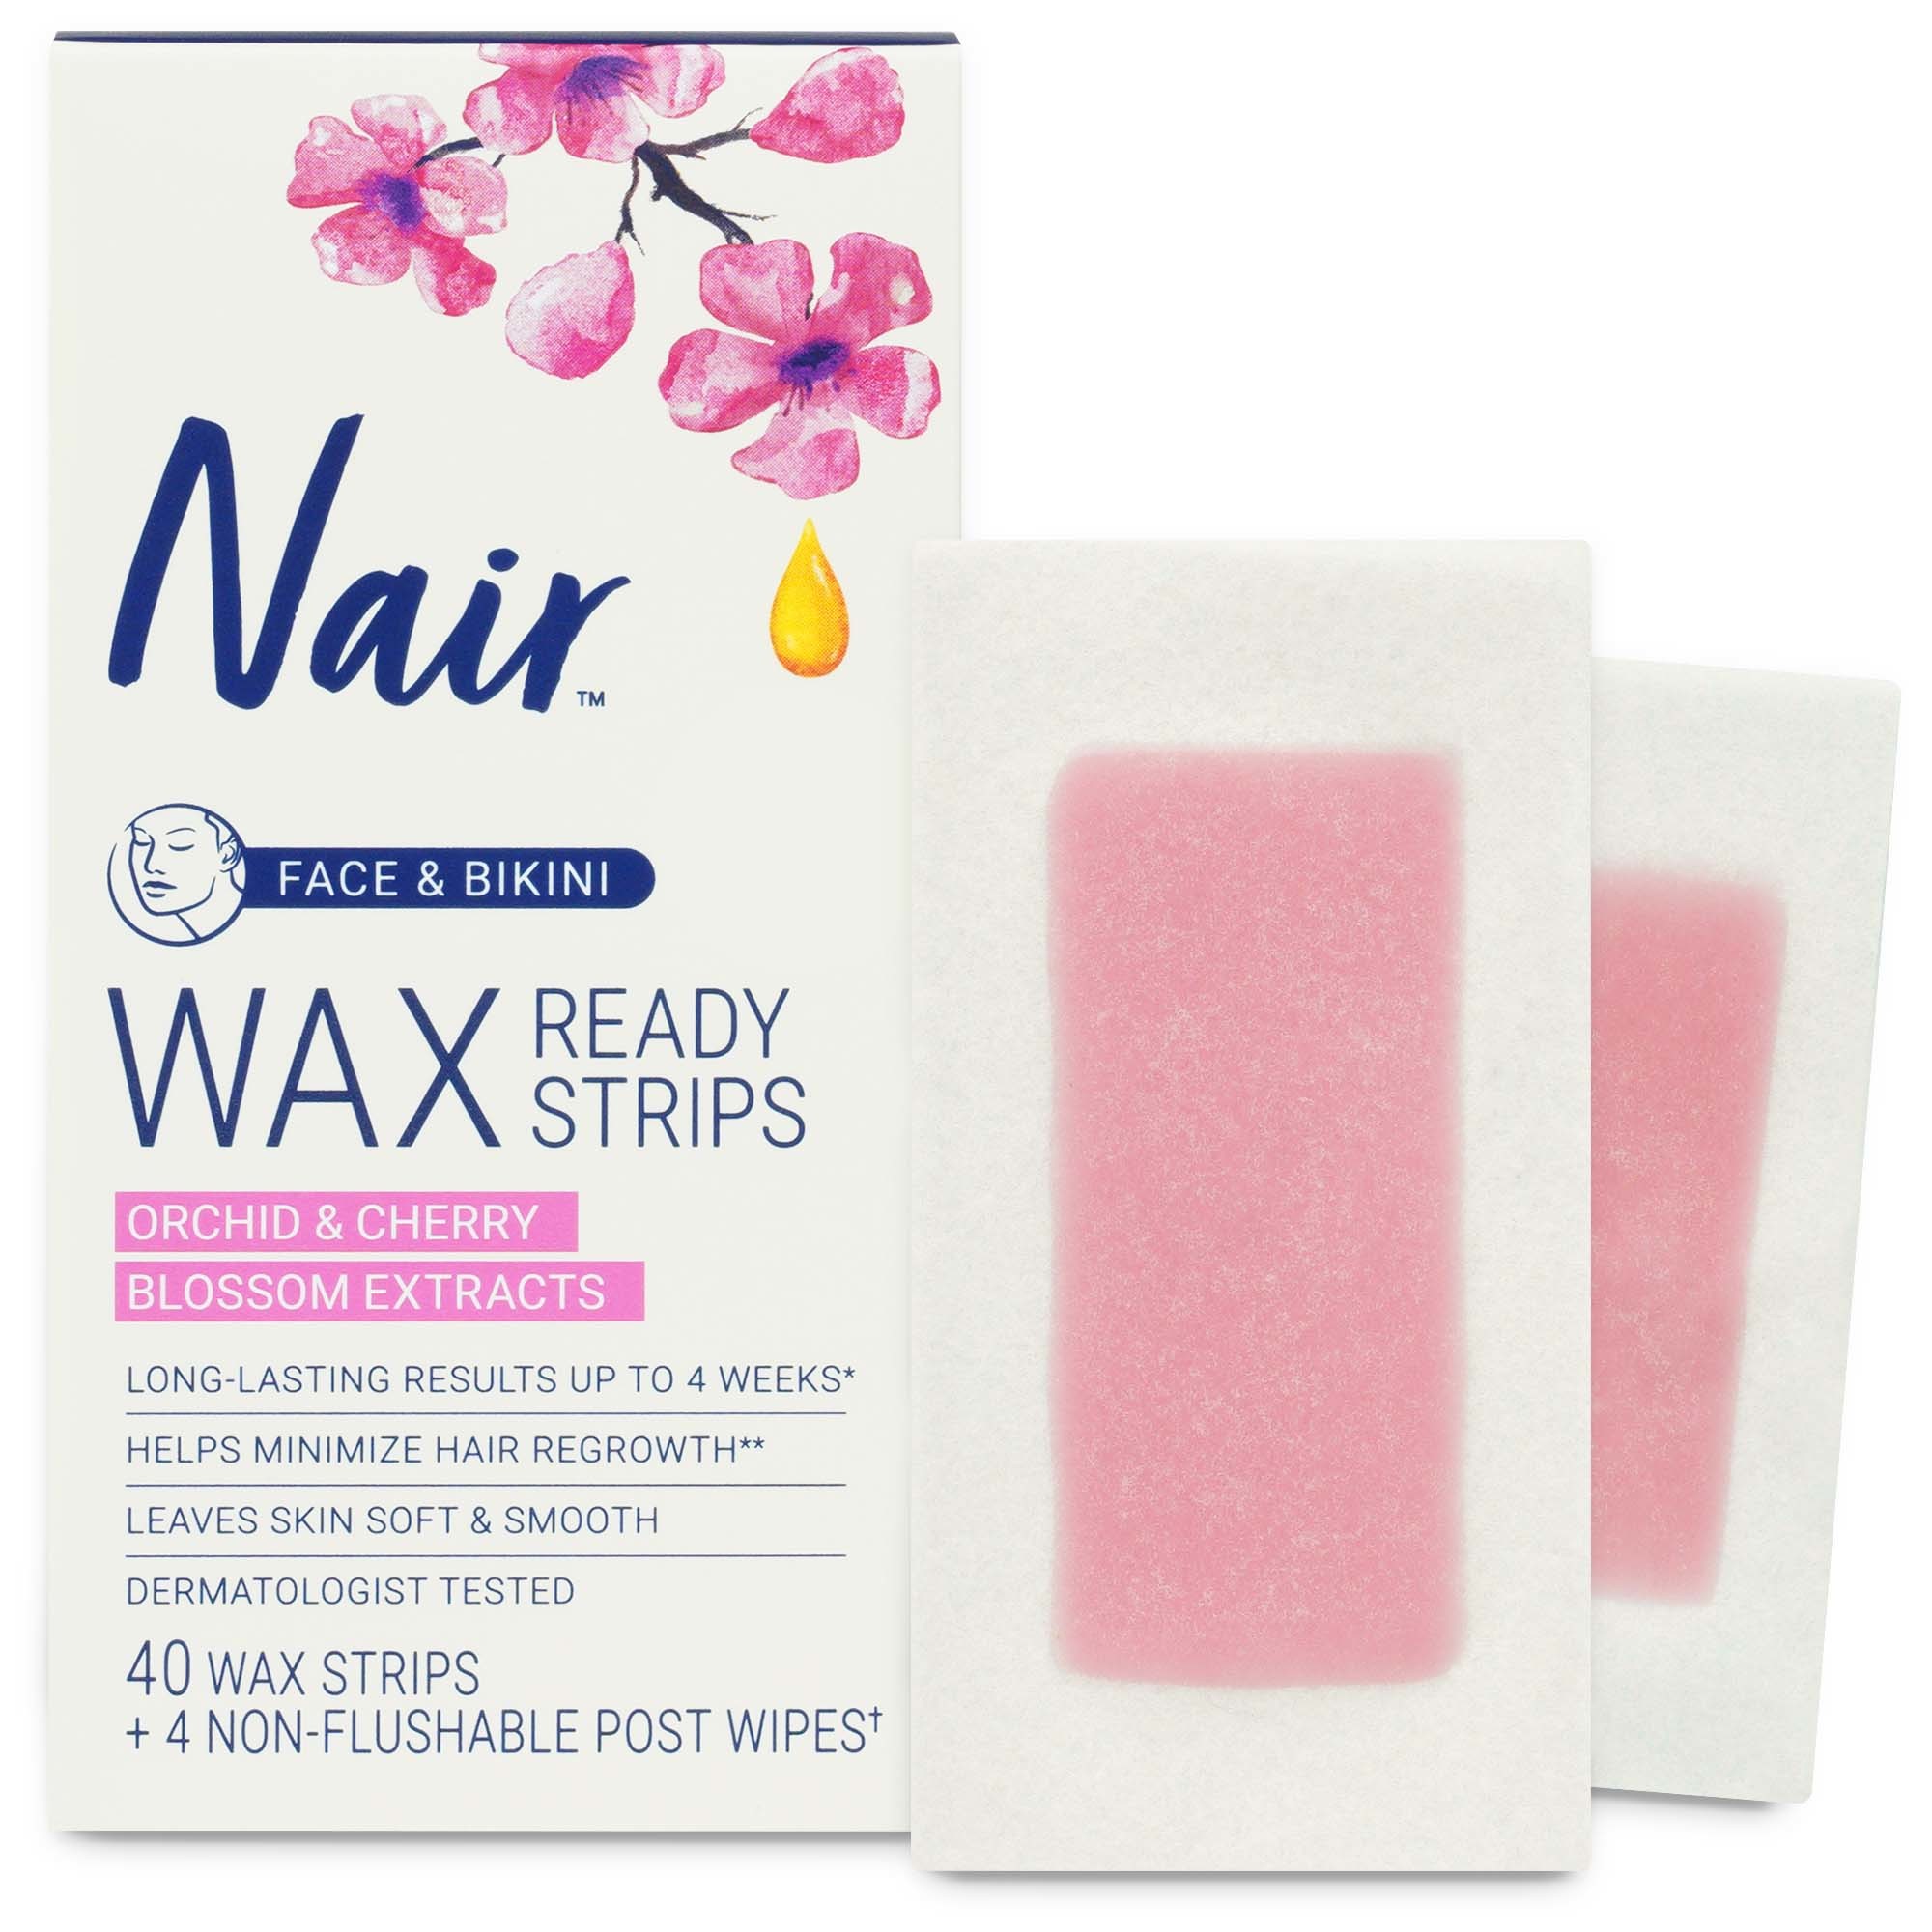 Nair Hair Remover Wax Ready Strips, Face and Bikini Hair Removal Wax Strips, 40 Count - image 1 of 12